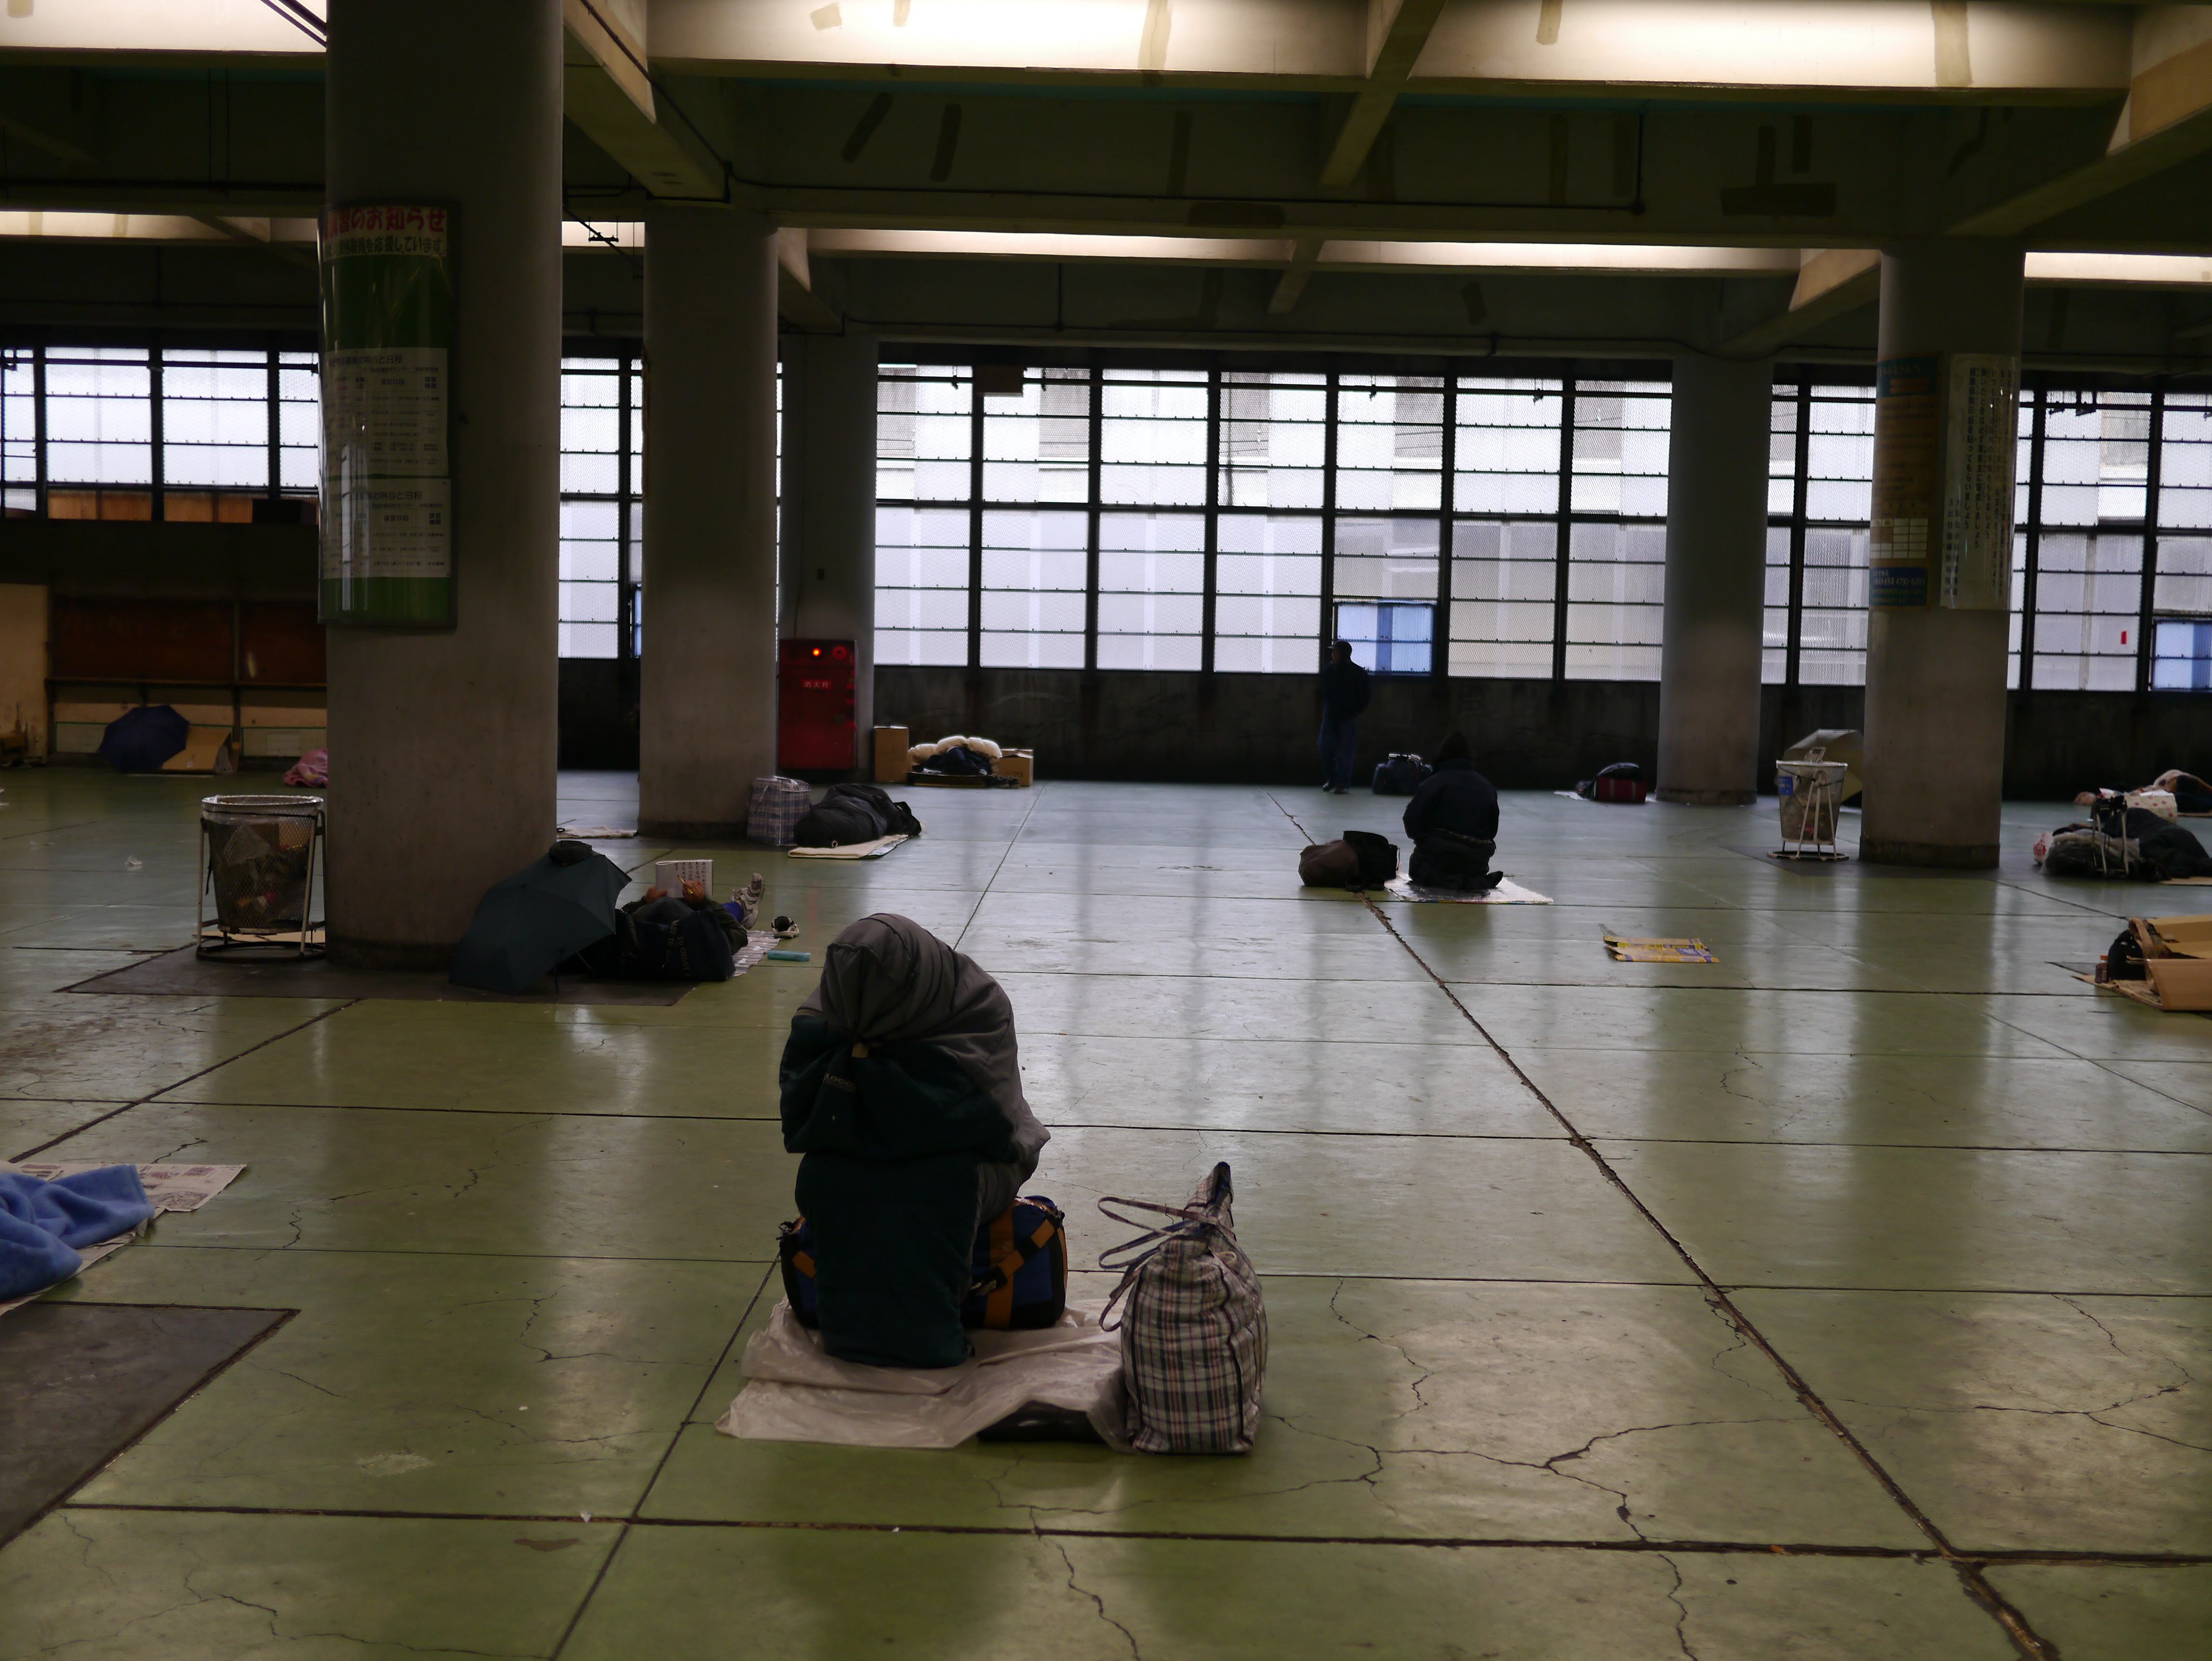 [Figure 2: Inside the Airin Center. During the day people stay here to escape heat or cold]